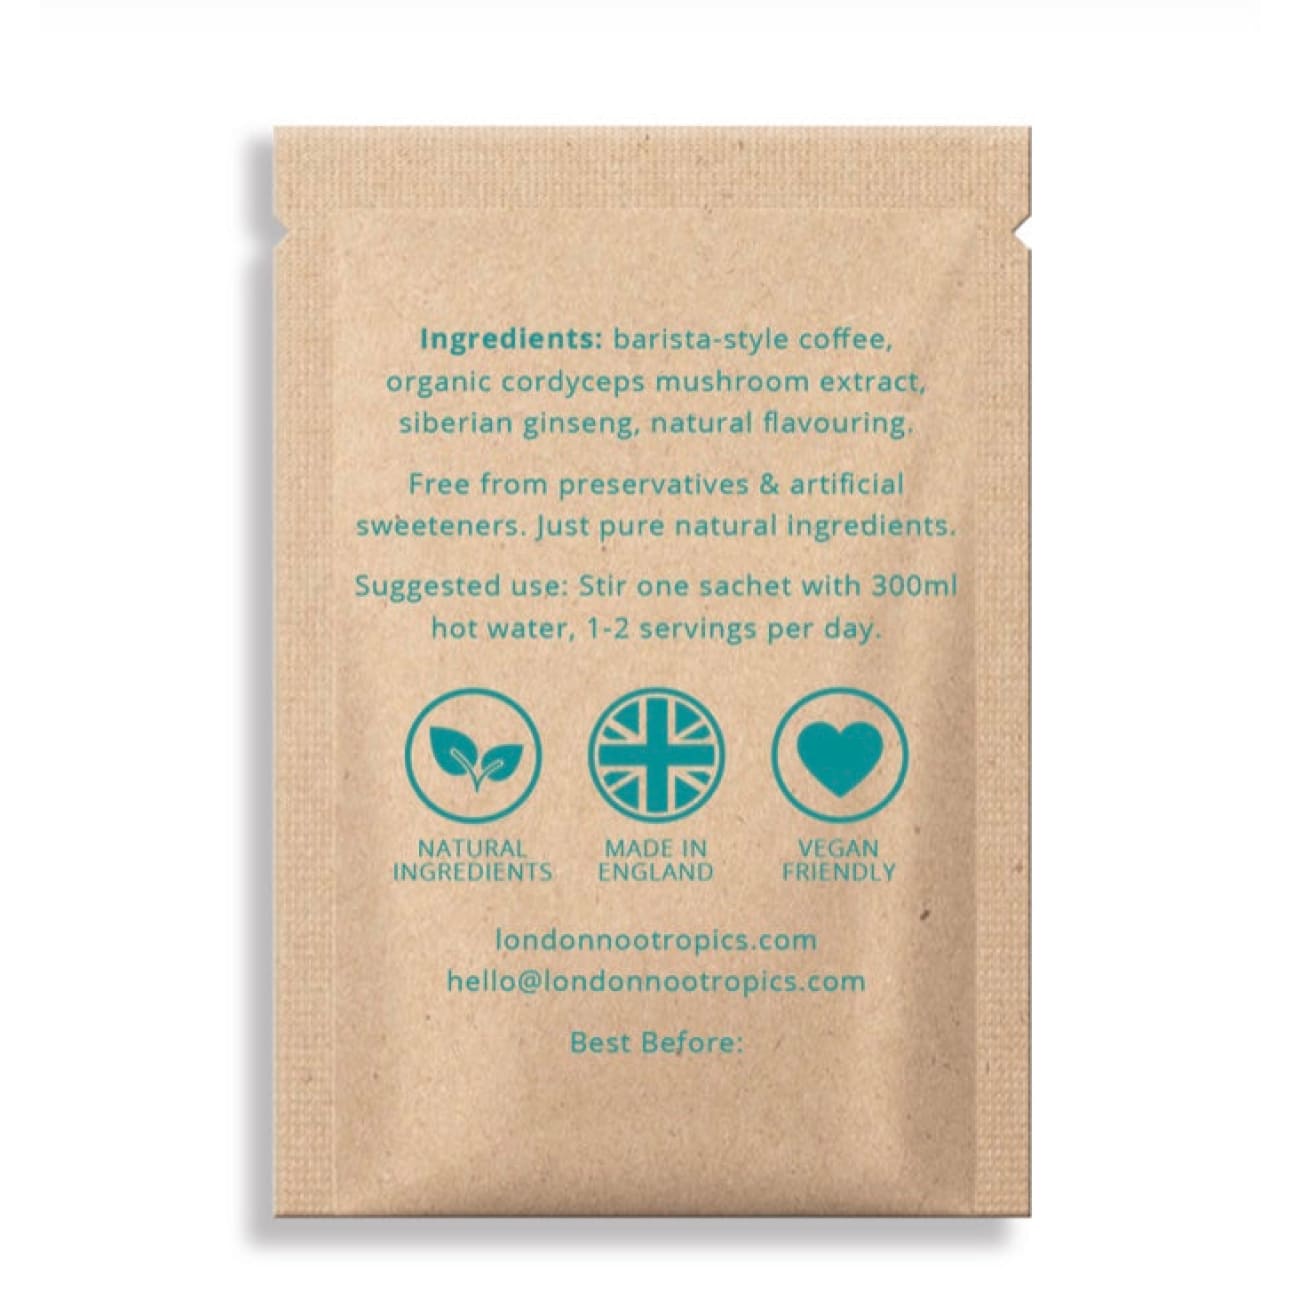 Selection Box - Try our 3 adaptogenic coffee blends! -